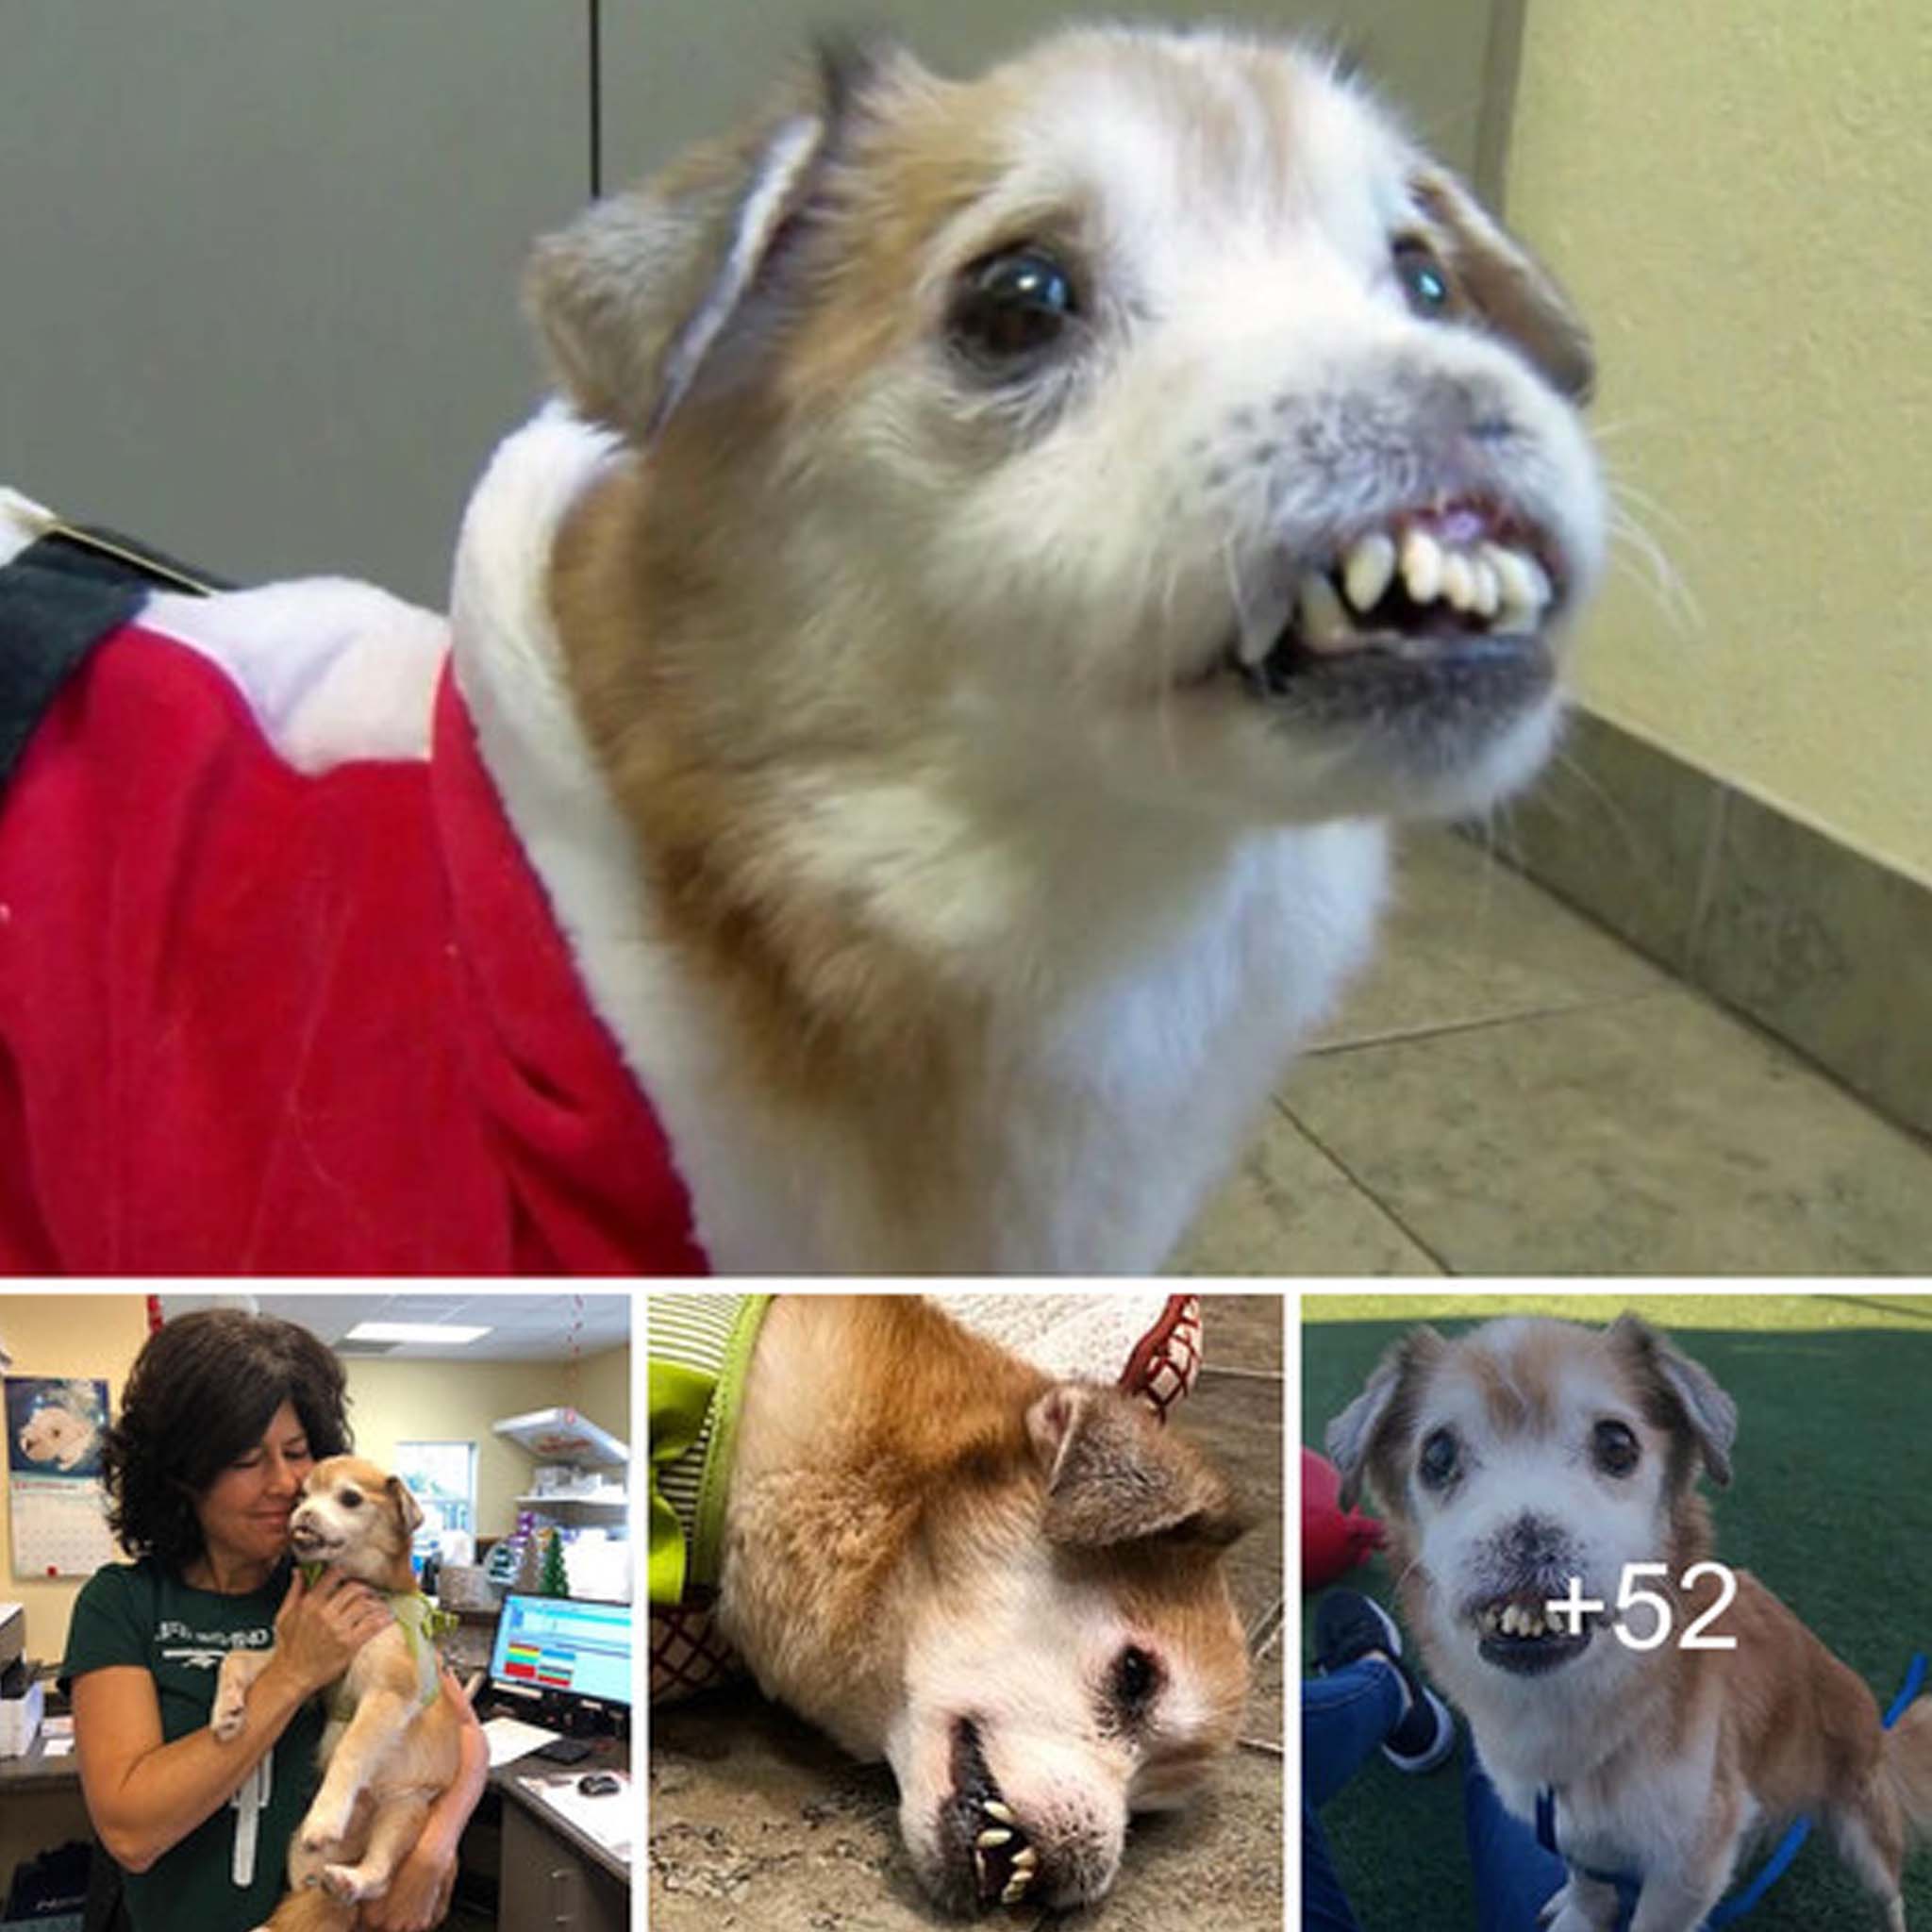 Meet the strange, alien-looking dog that has no nose and jagged teeth but is brimming with love and a strong desire to live.